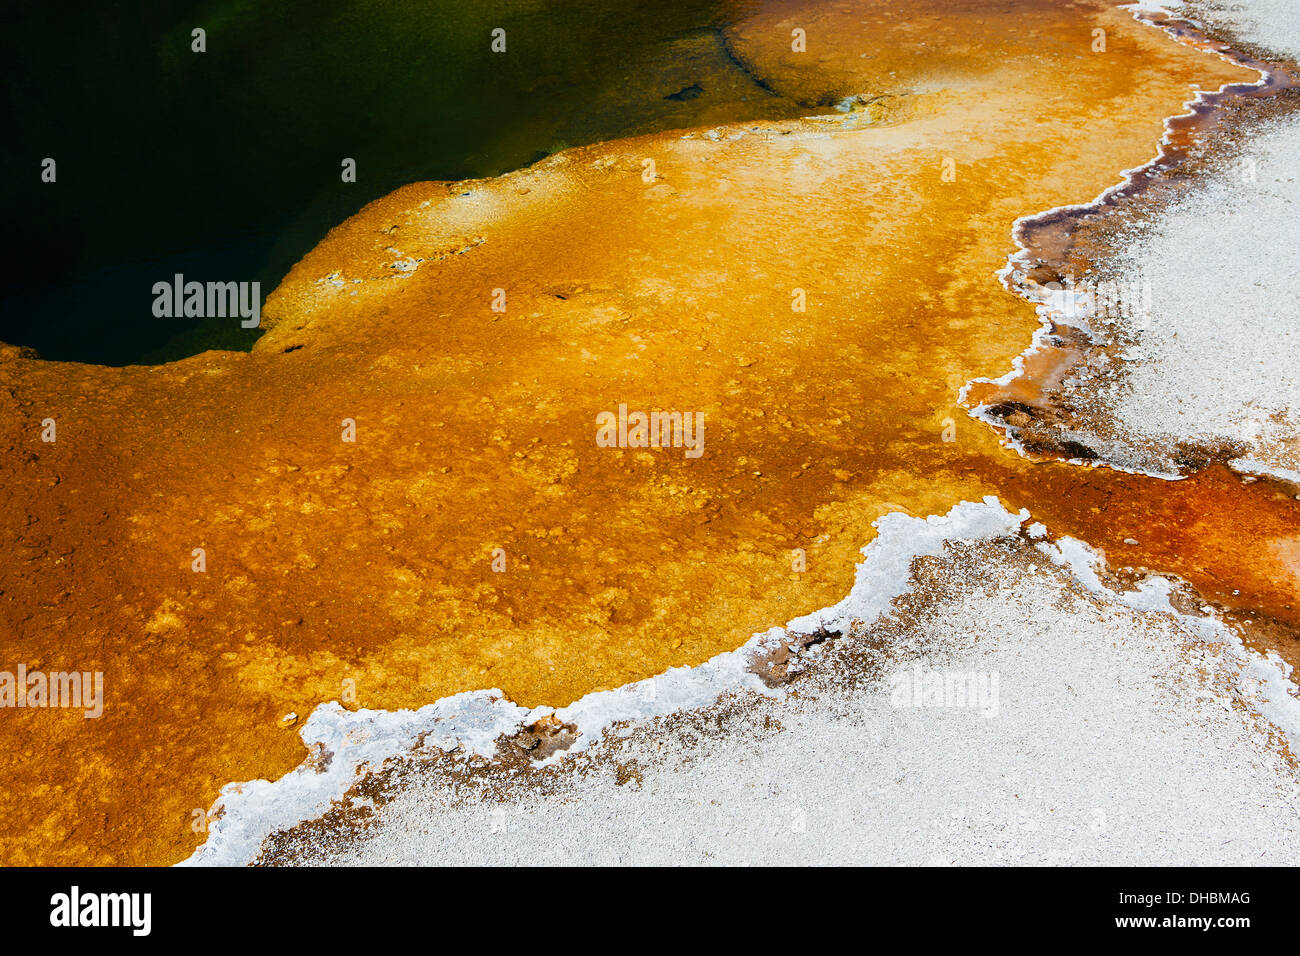 Detail of colourful water mineral deposits and rock formations from Midway Geyser, in Yellowstone National Park. Stock Photo